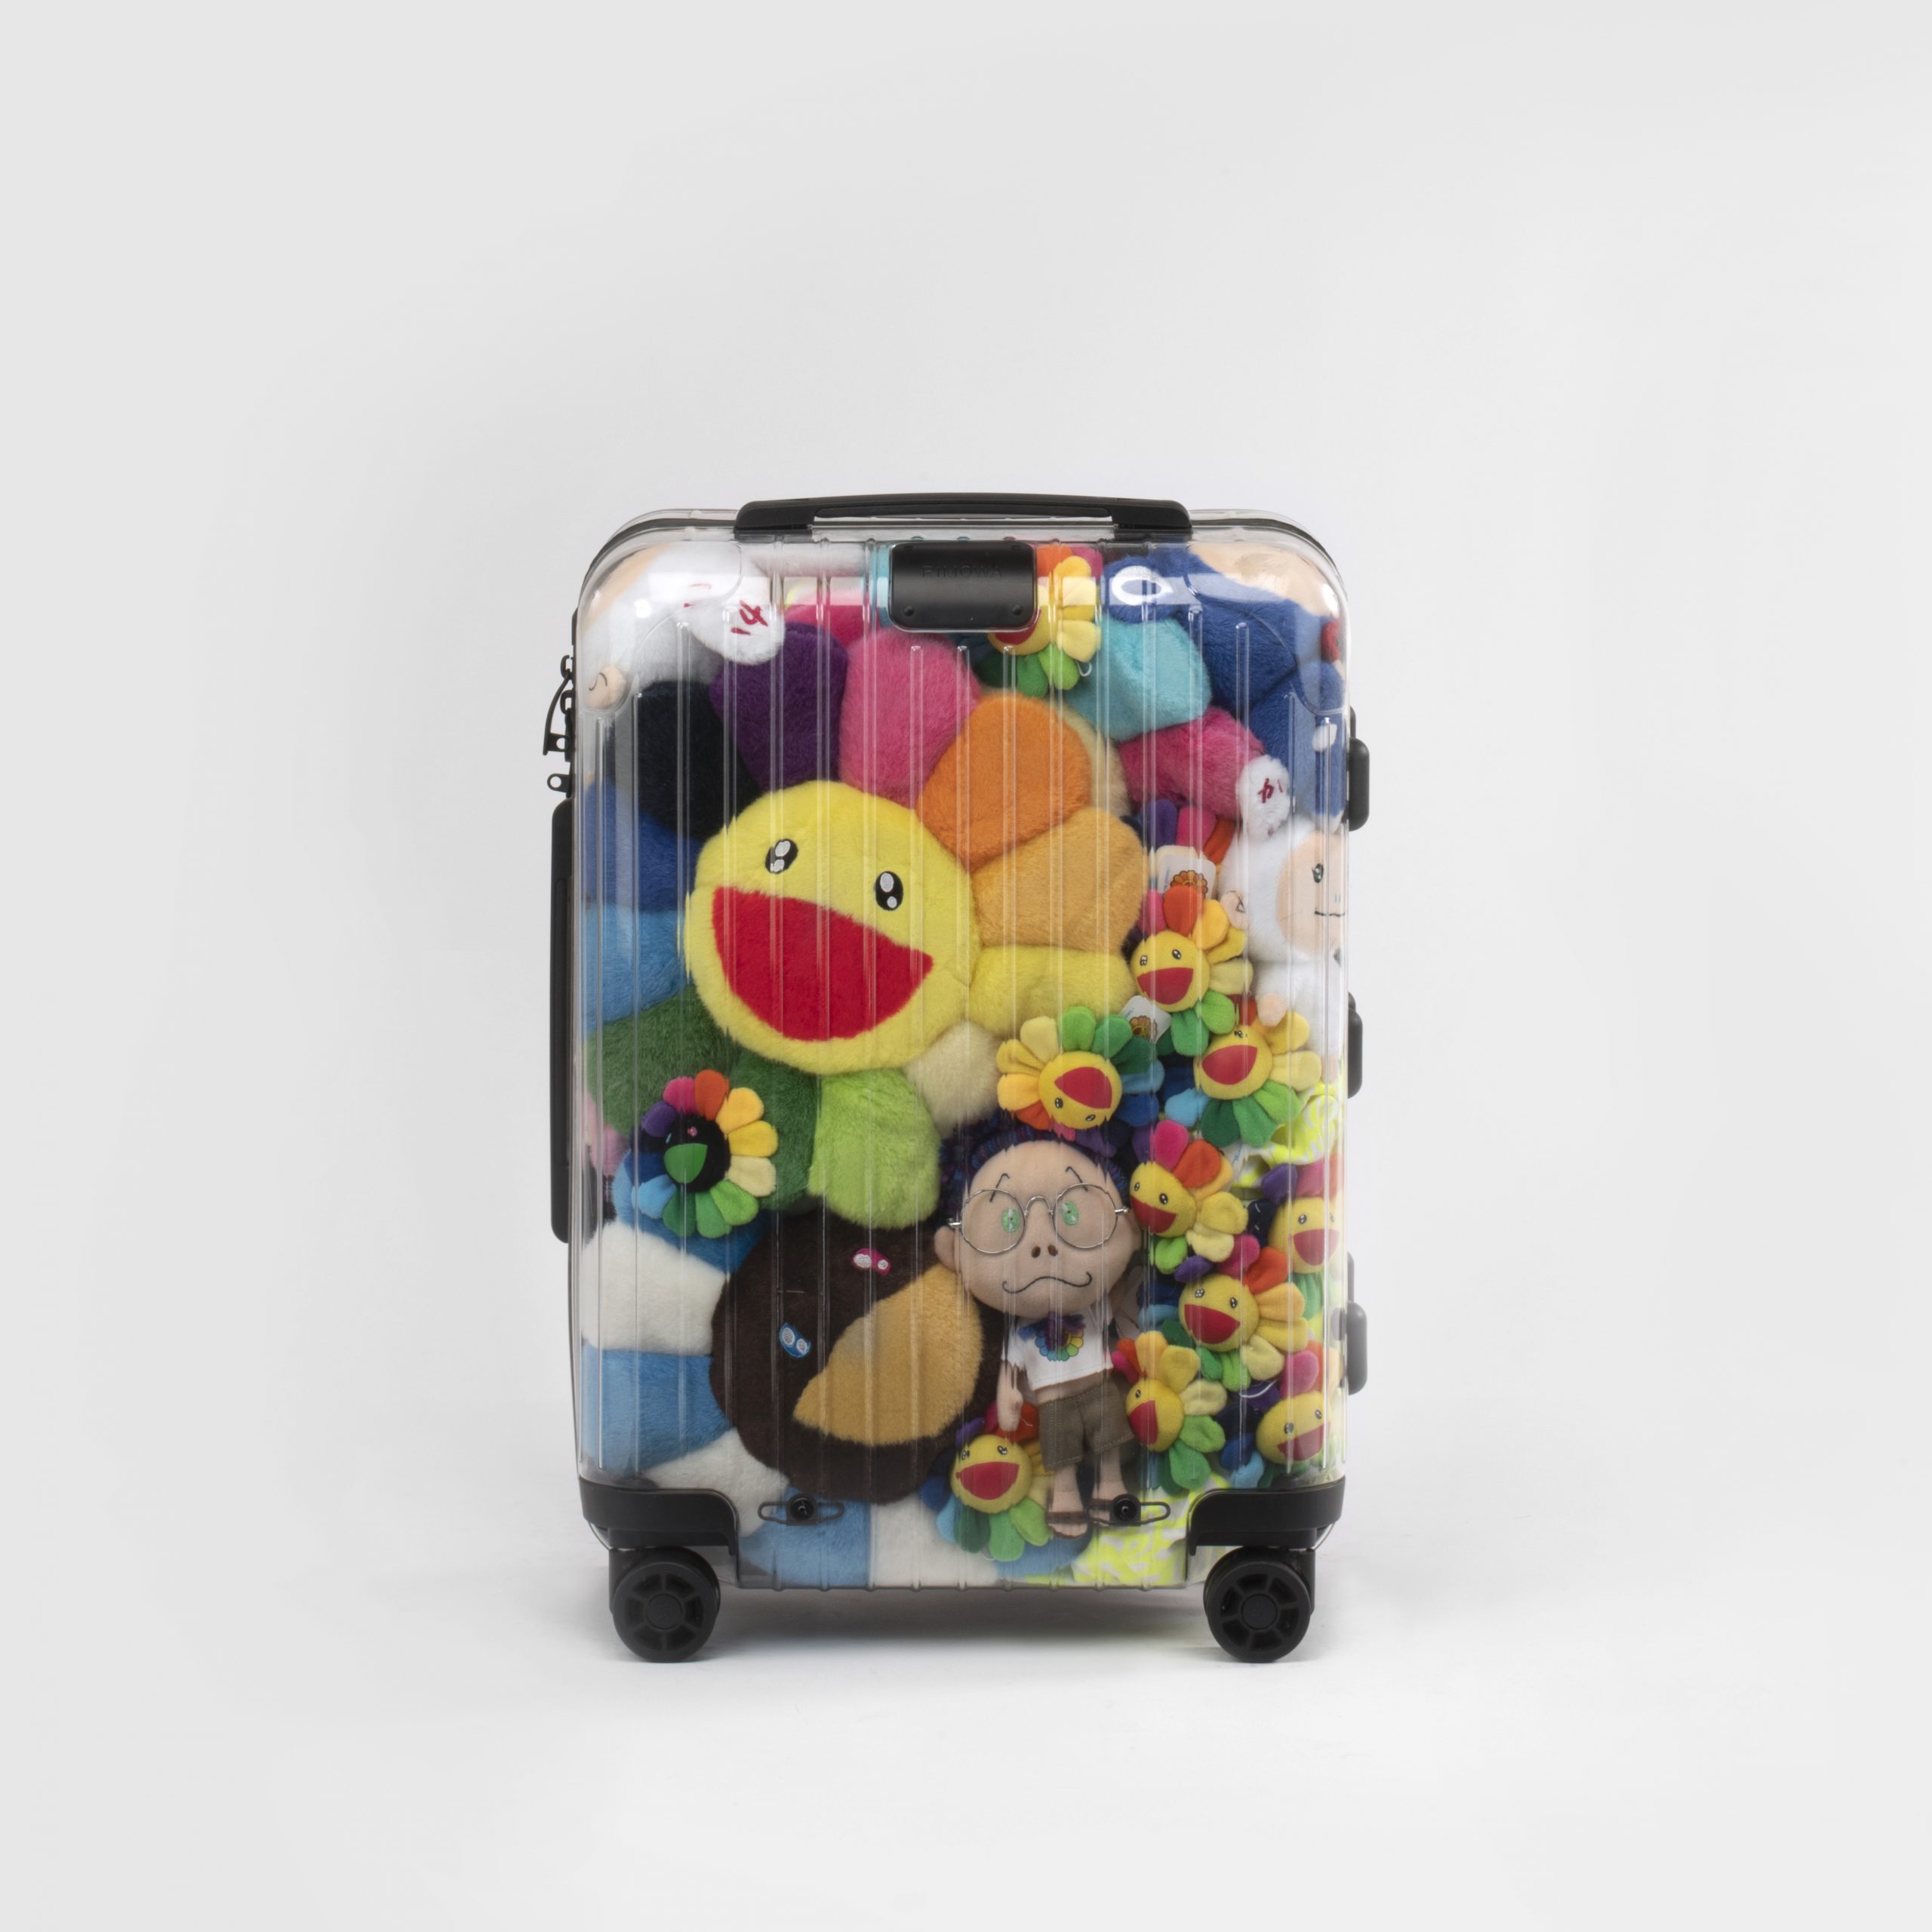 RIMOWA Turns To Emerging And Established Artists For Its Latest